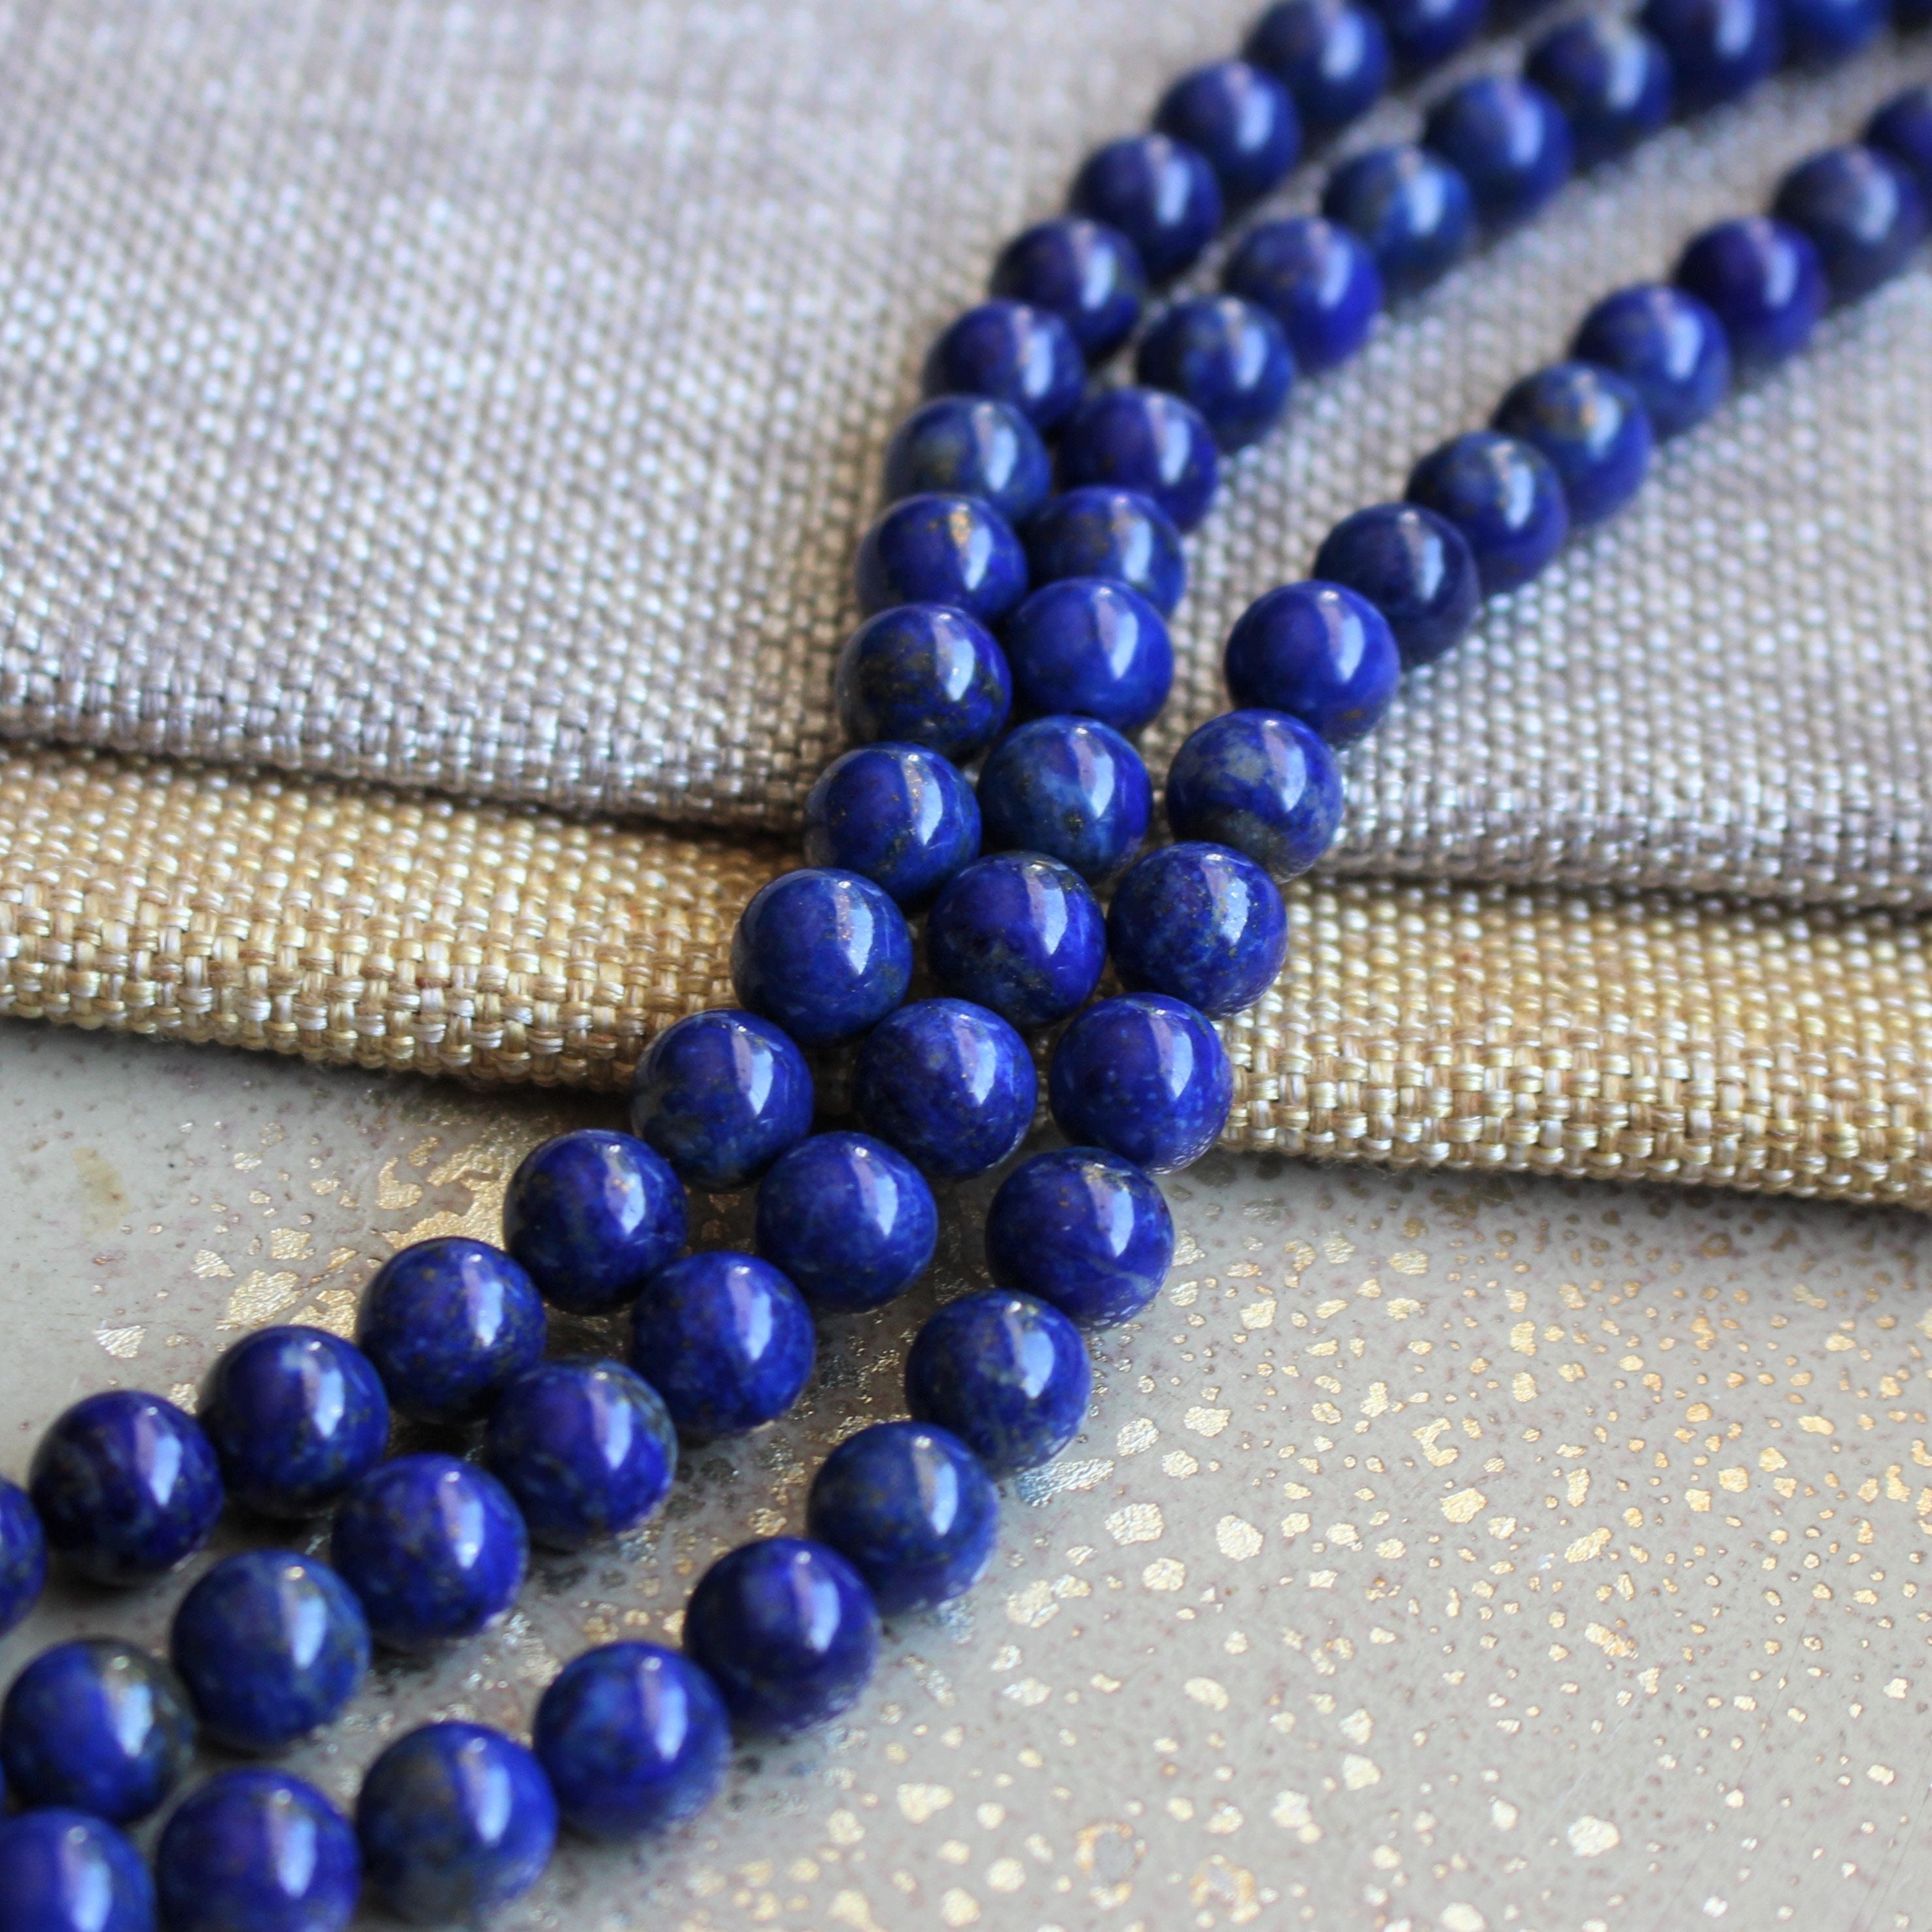 RVG 8mm Lapis Lazuli Beads Round Gemstone Loose Stone Mala 15.5 in Strand for Jewelry Making Approx 45-48 pcs 